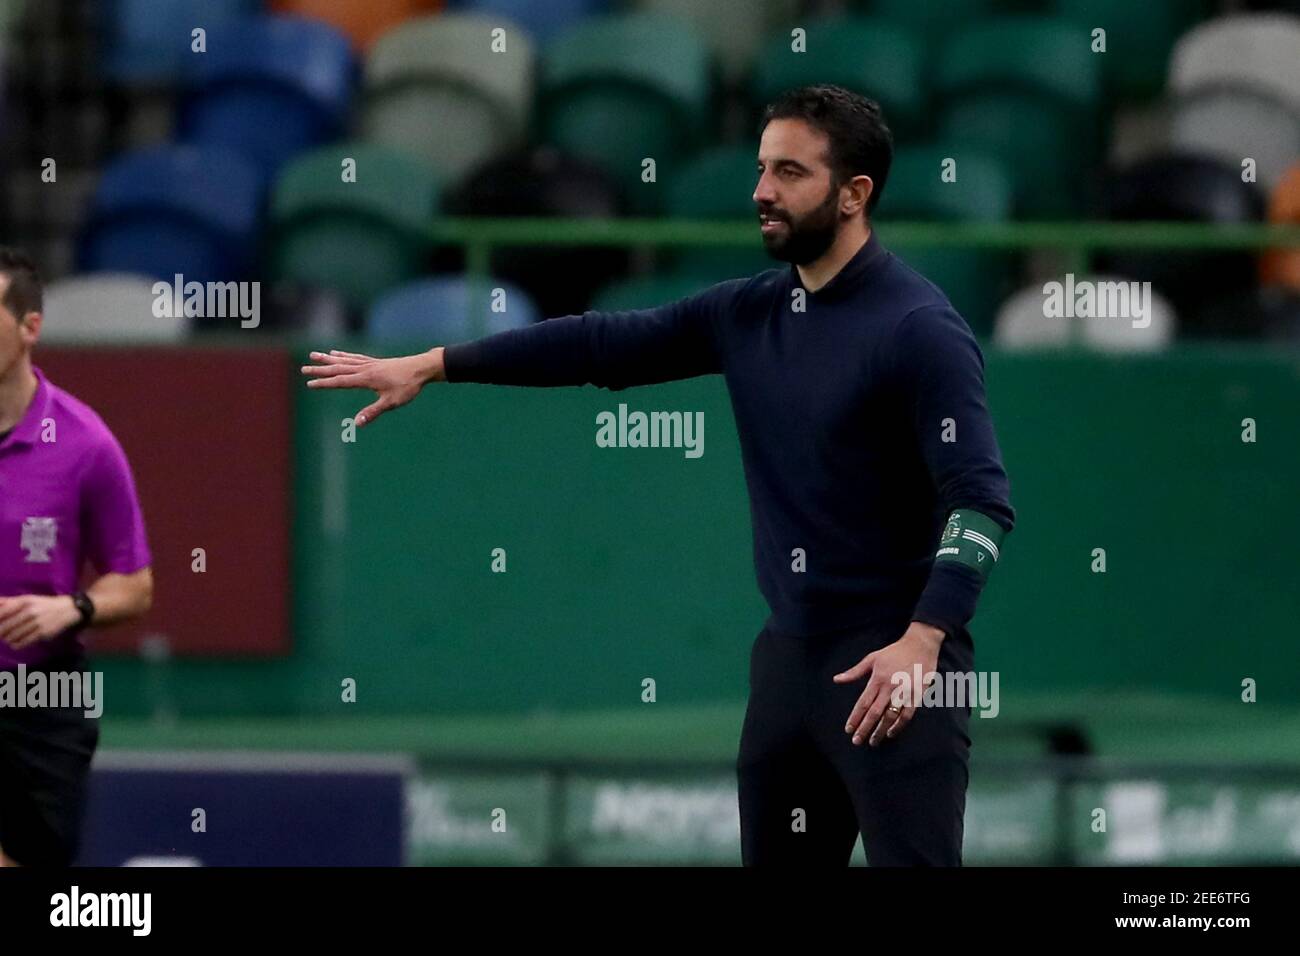 Lisbon, Portugal. 15th Feb, 2021. Sporting's head coach Ruben Amorim gestures during the Portuguese League football match between Sporting CP and FC Pacos de Ferreira at Jose Alvalade stadium in Lisbon, Portugal on February 15, 2021. Credit: Pedro Fiuza/ZUMA Wire/Alamy Live News Stock Photo